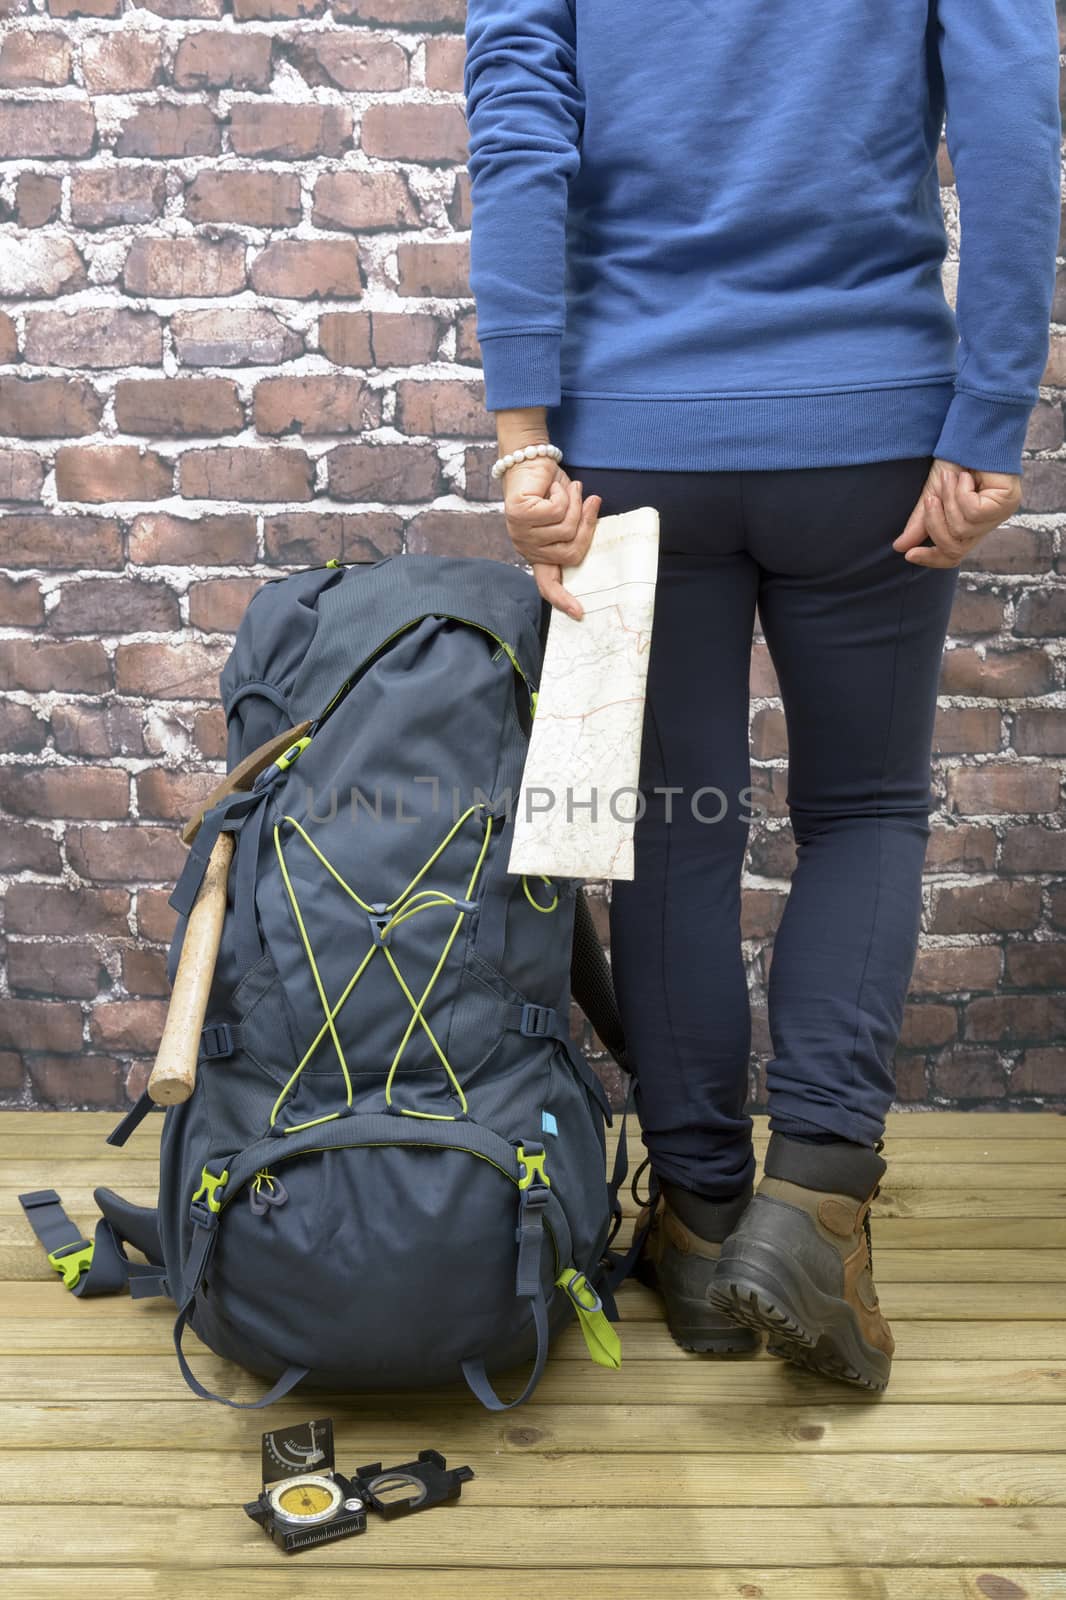 Woman with Hiking equipment, rucksack, boots and backpack. Concept for family hiking. Colorful background.